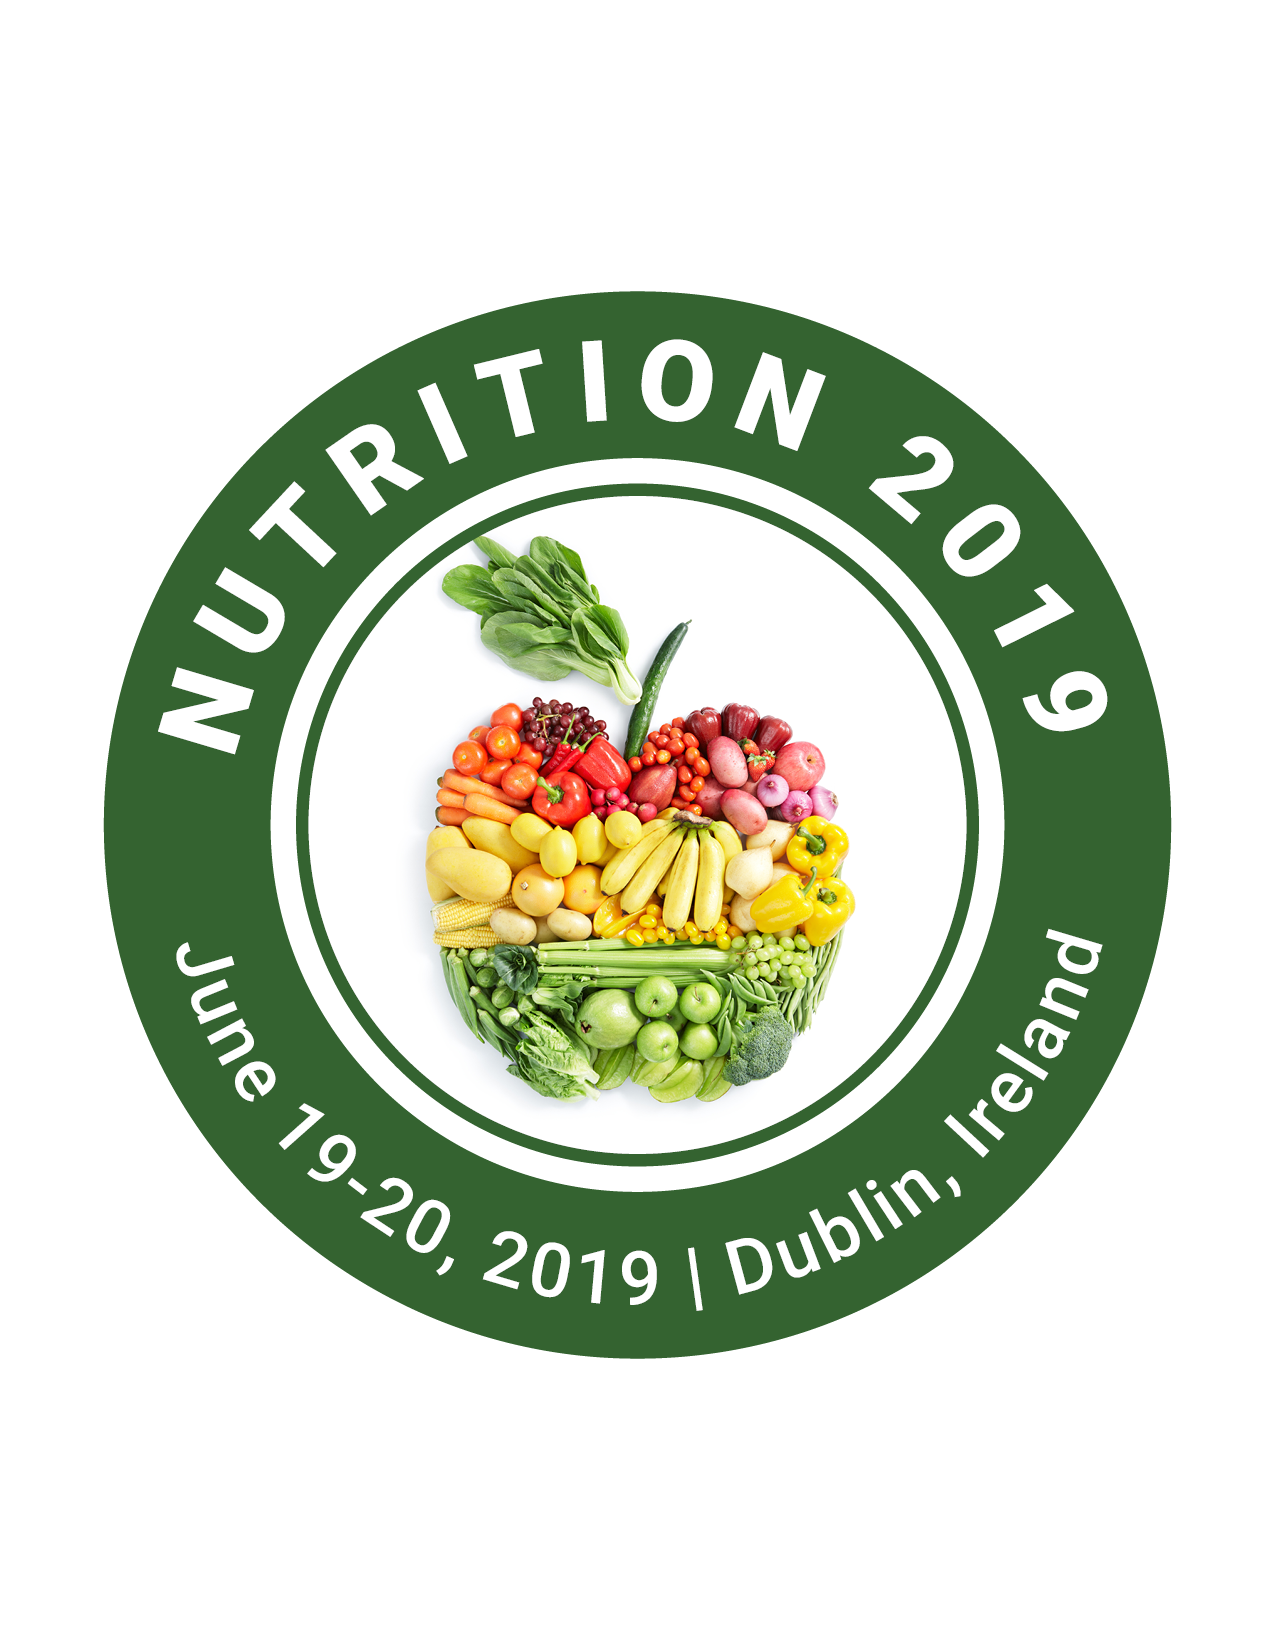 2nd International Conference & Expo on Nutrition, Fitness and Health Management